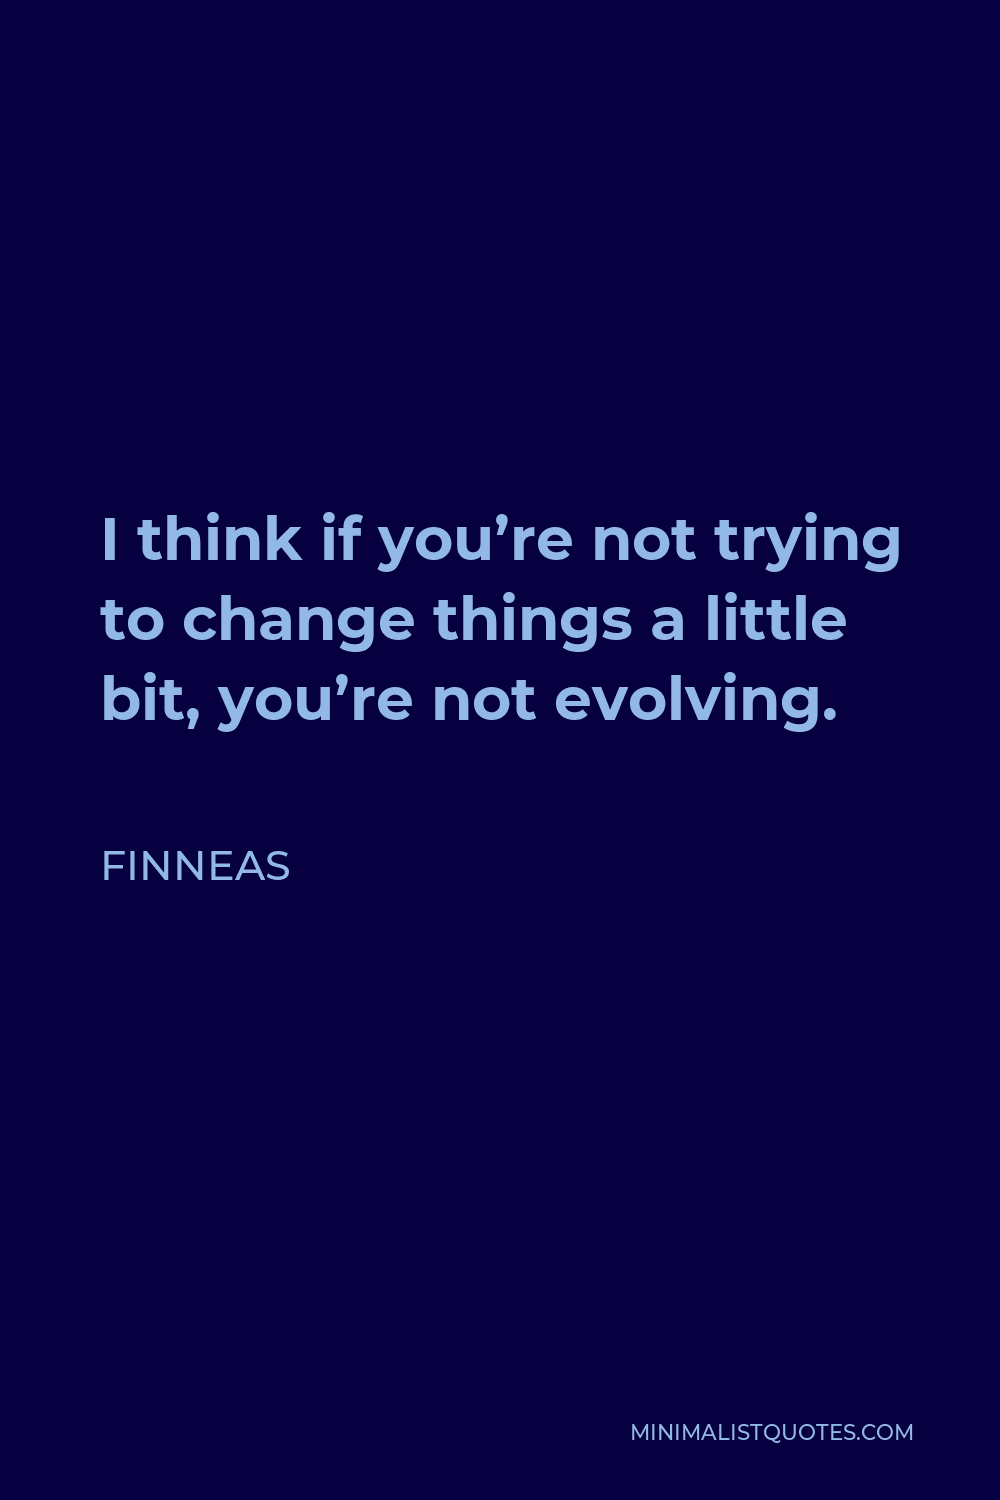 Finneas Quote - I think if you’re not trying to change things a little bit, you’re not evolving.